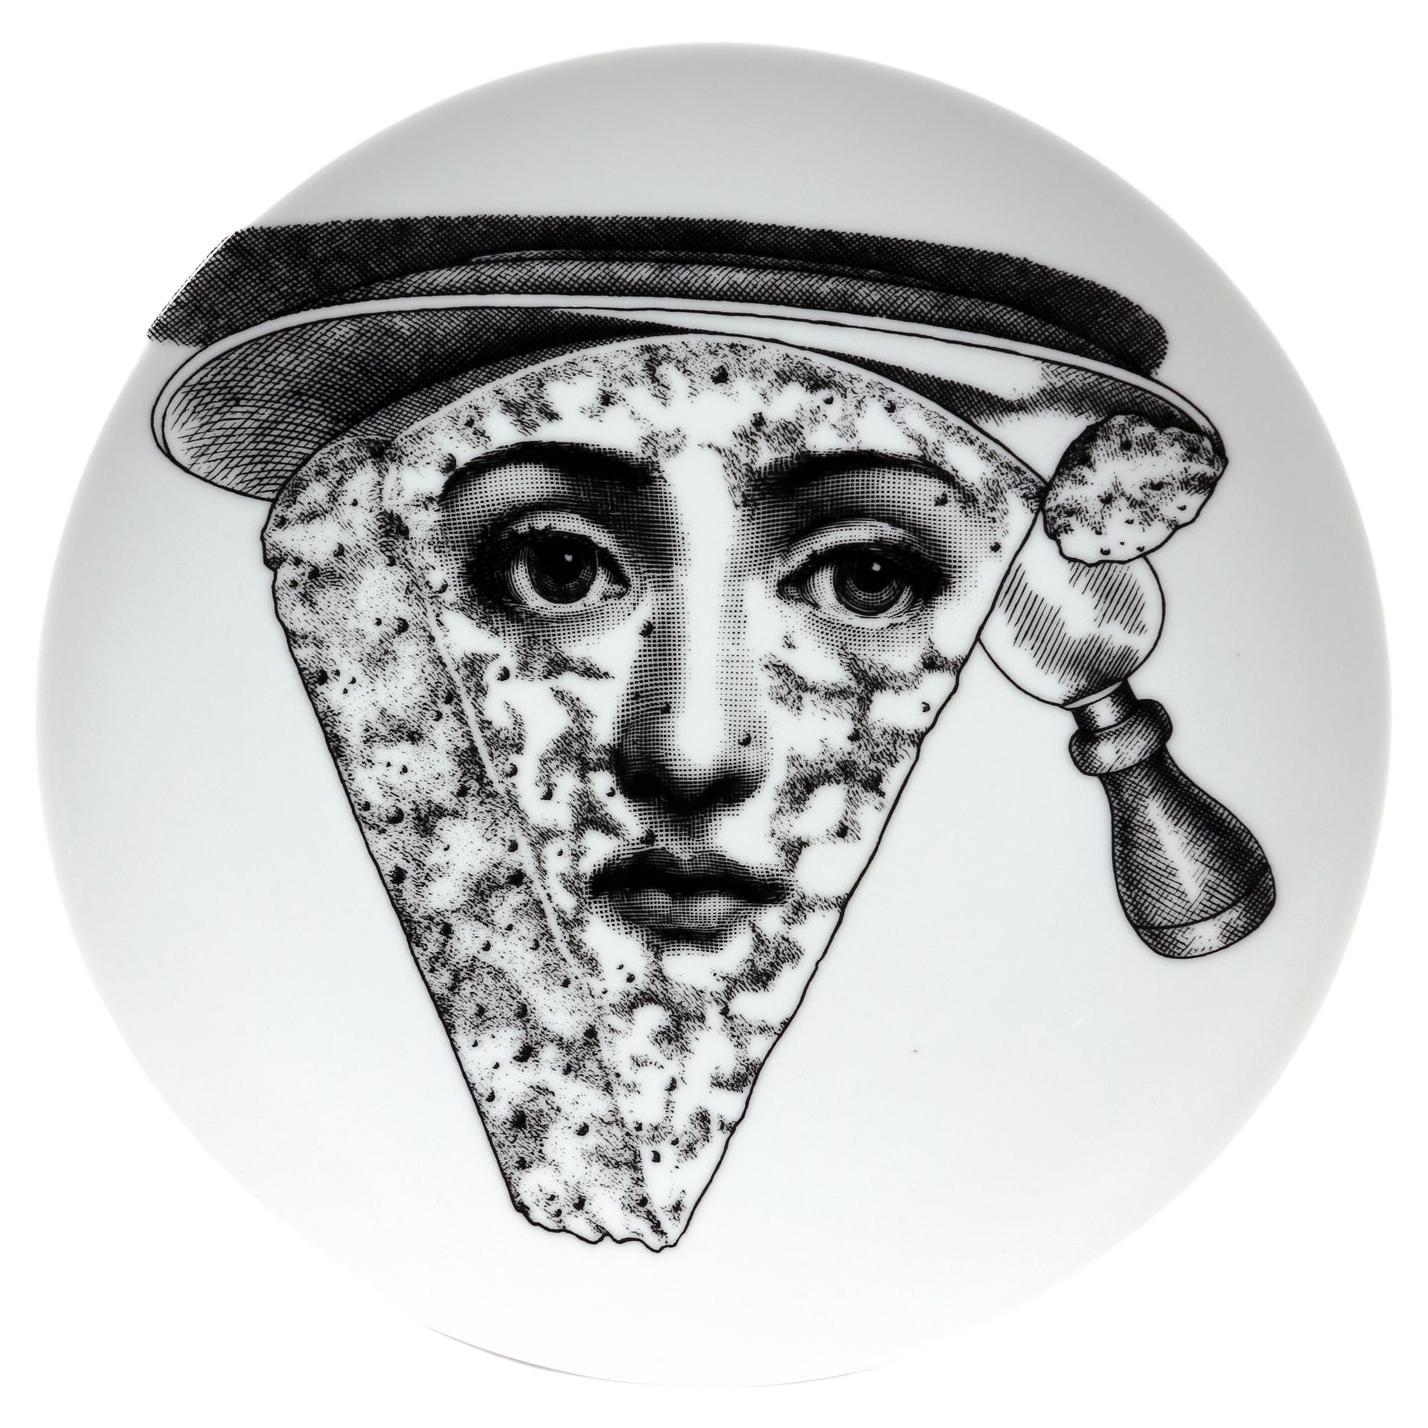 Piero Fornasetti Rosenthal Porcelain Themes And Variations Plate, Motiv  Number 25, Lady Bacchus, 1980s